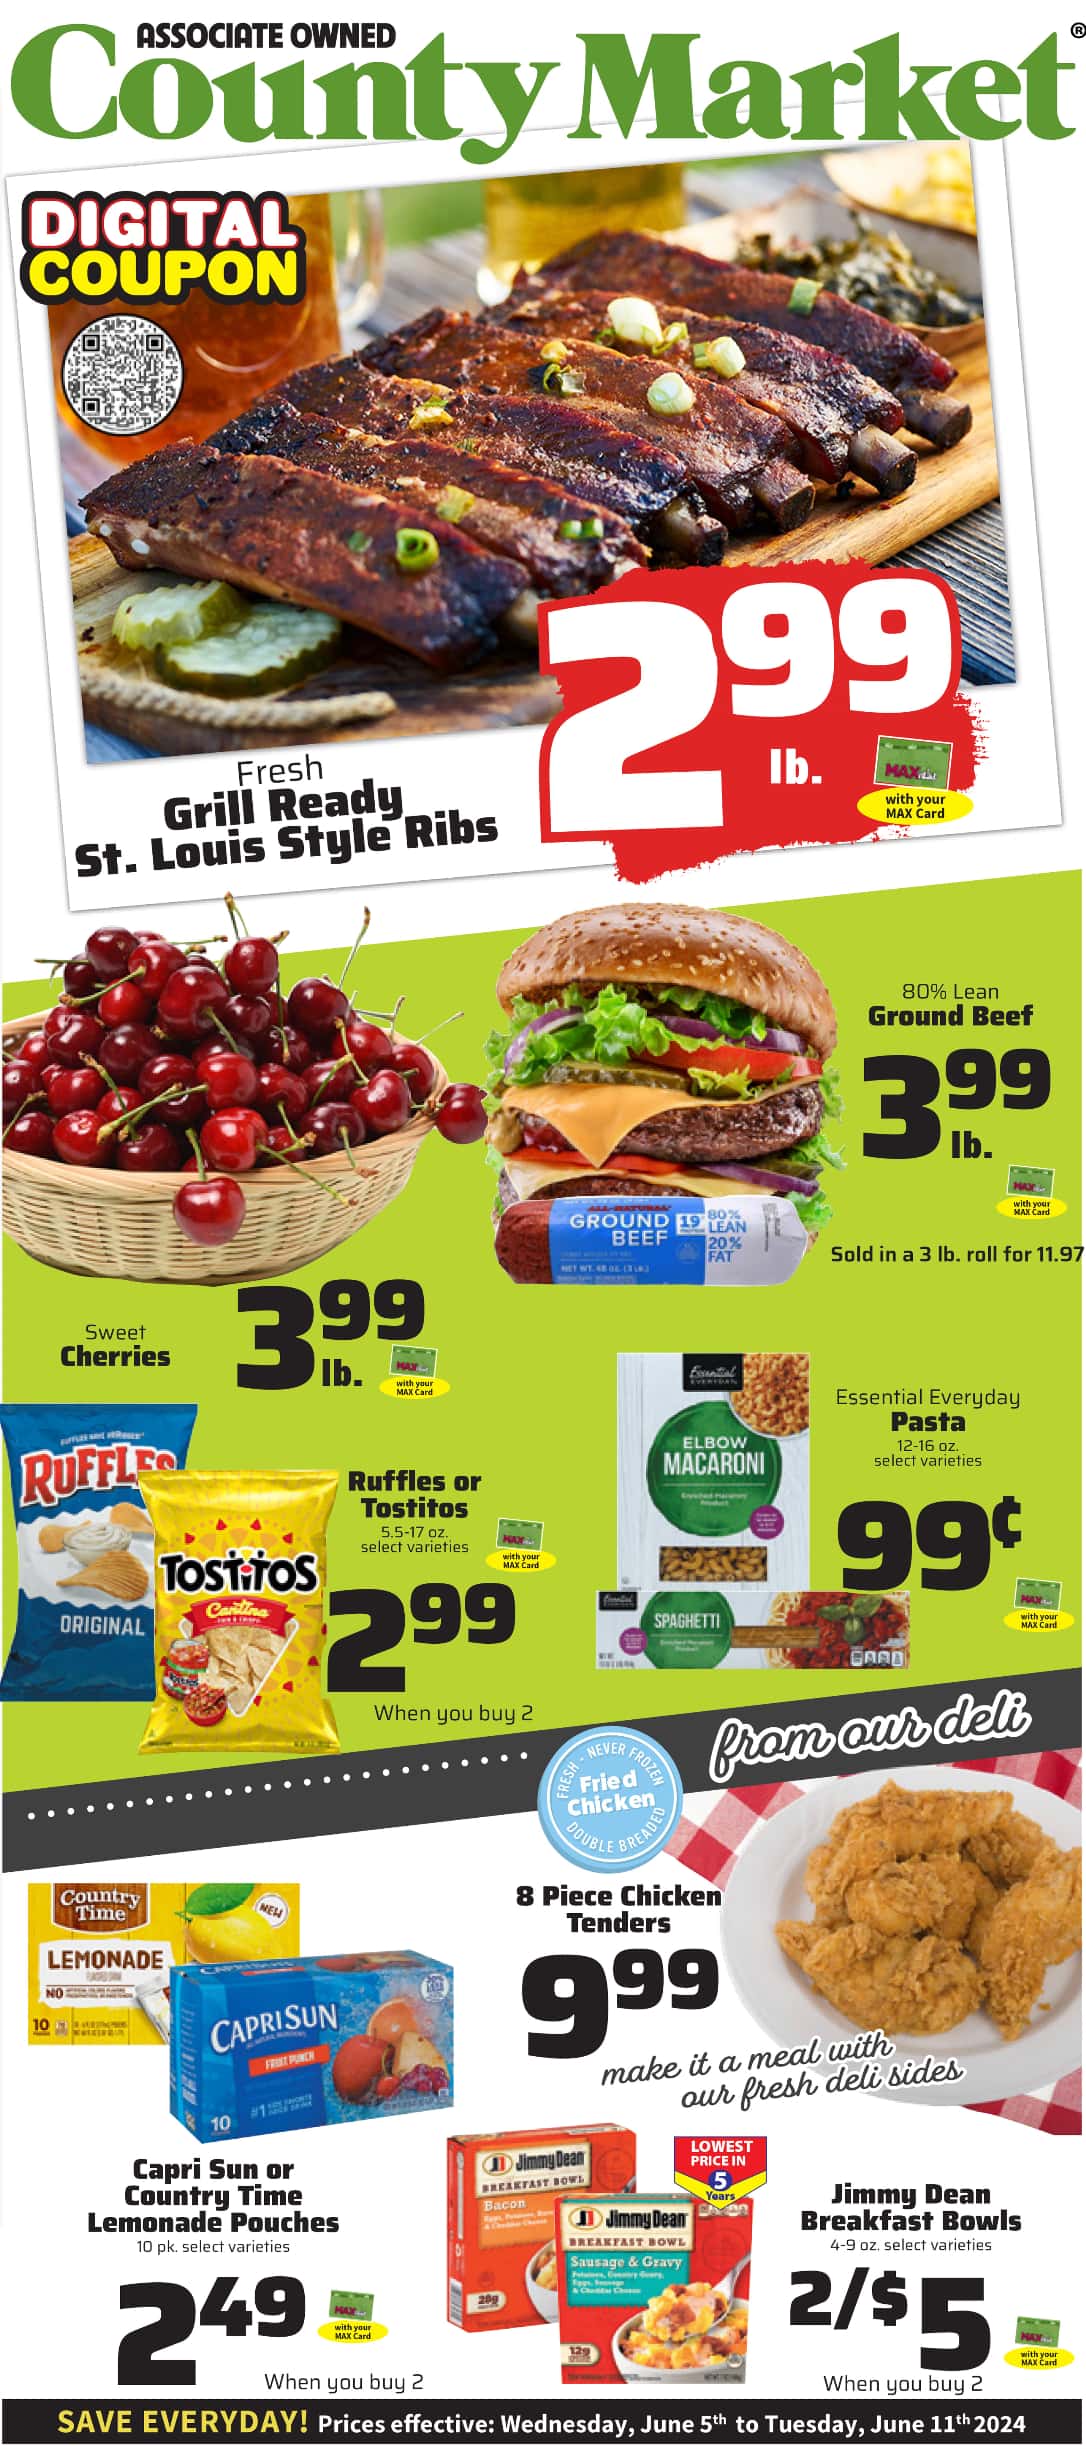 County Market July 2024 Weekly Sales, Deals, Discounts and Digital Coupons.